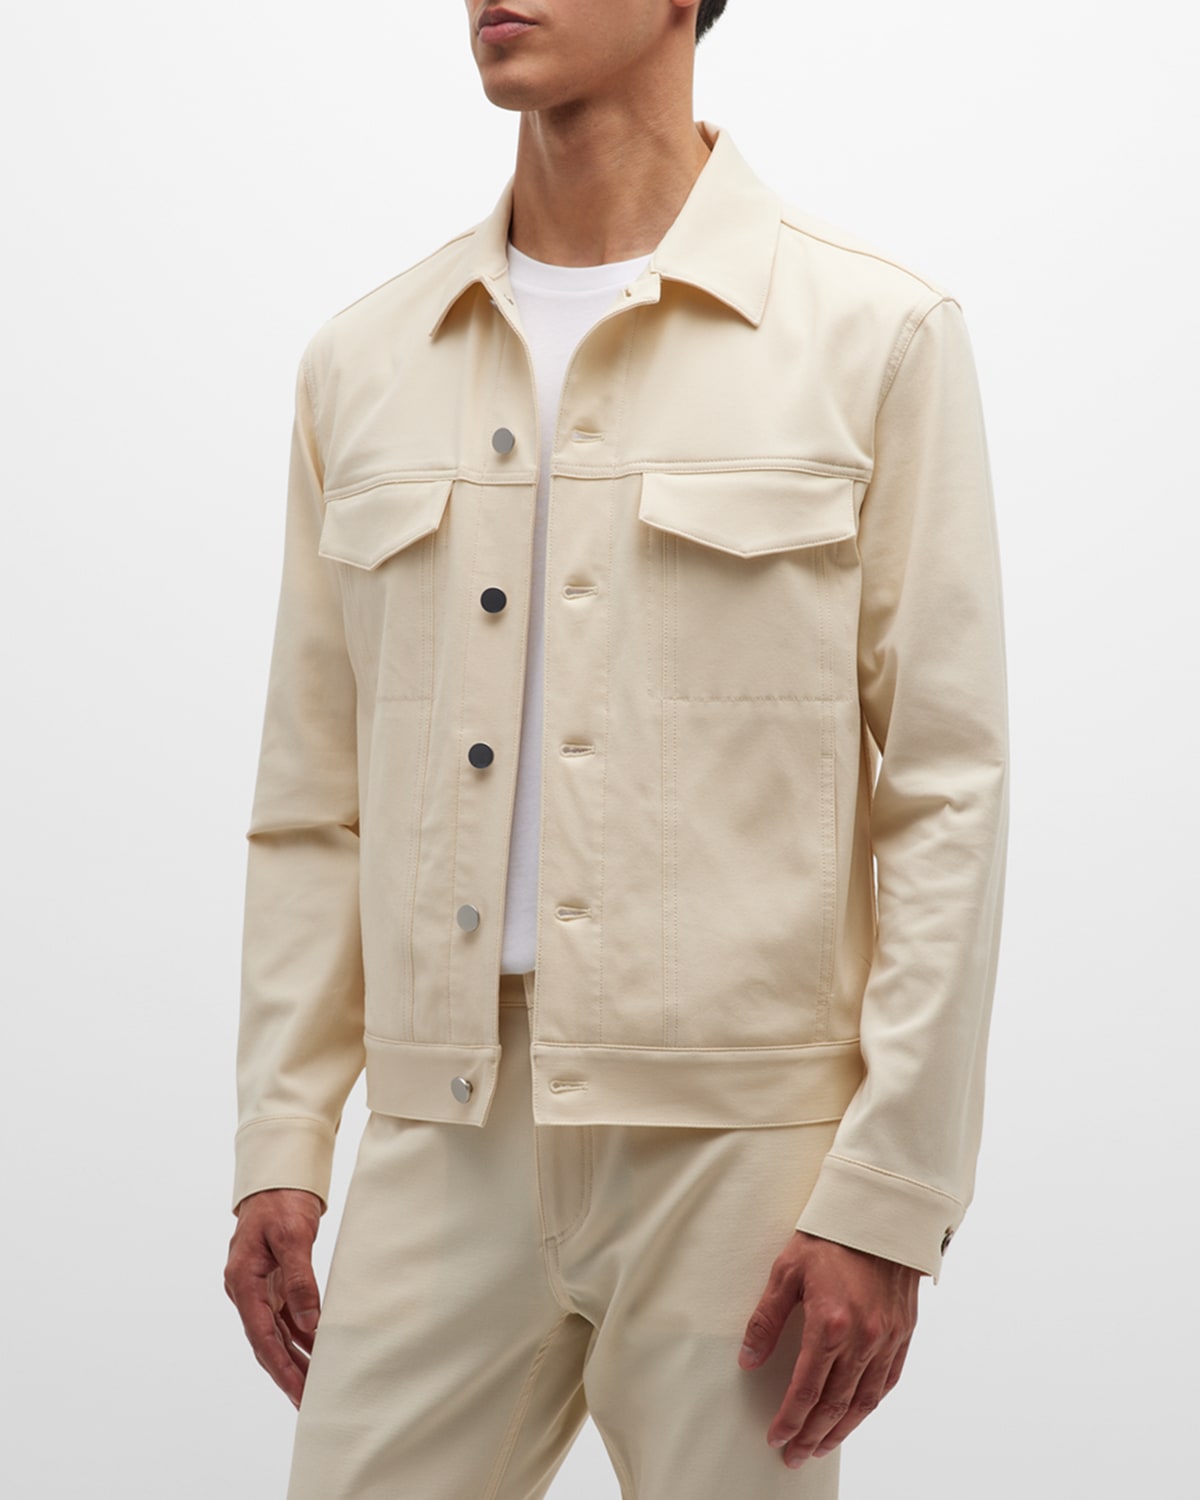 THEORY MEN'S RIVER NEOTERIC TWILL TRUCKER JACKET